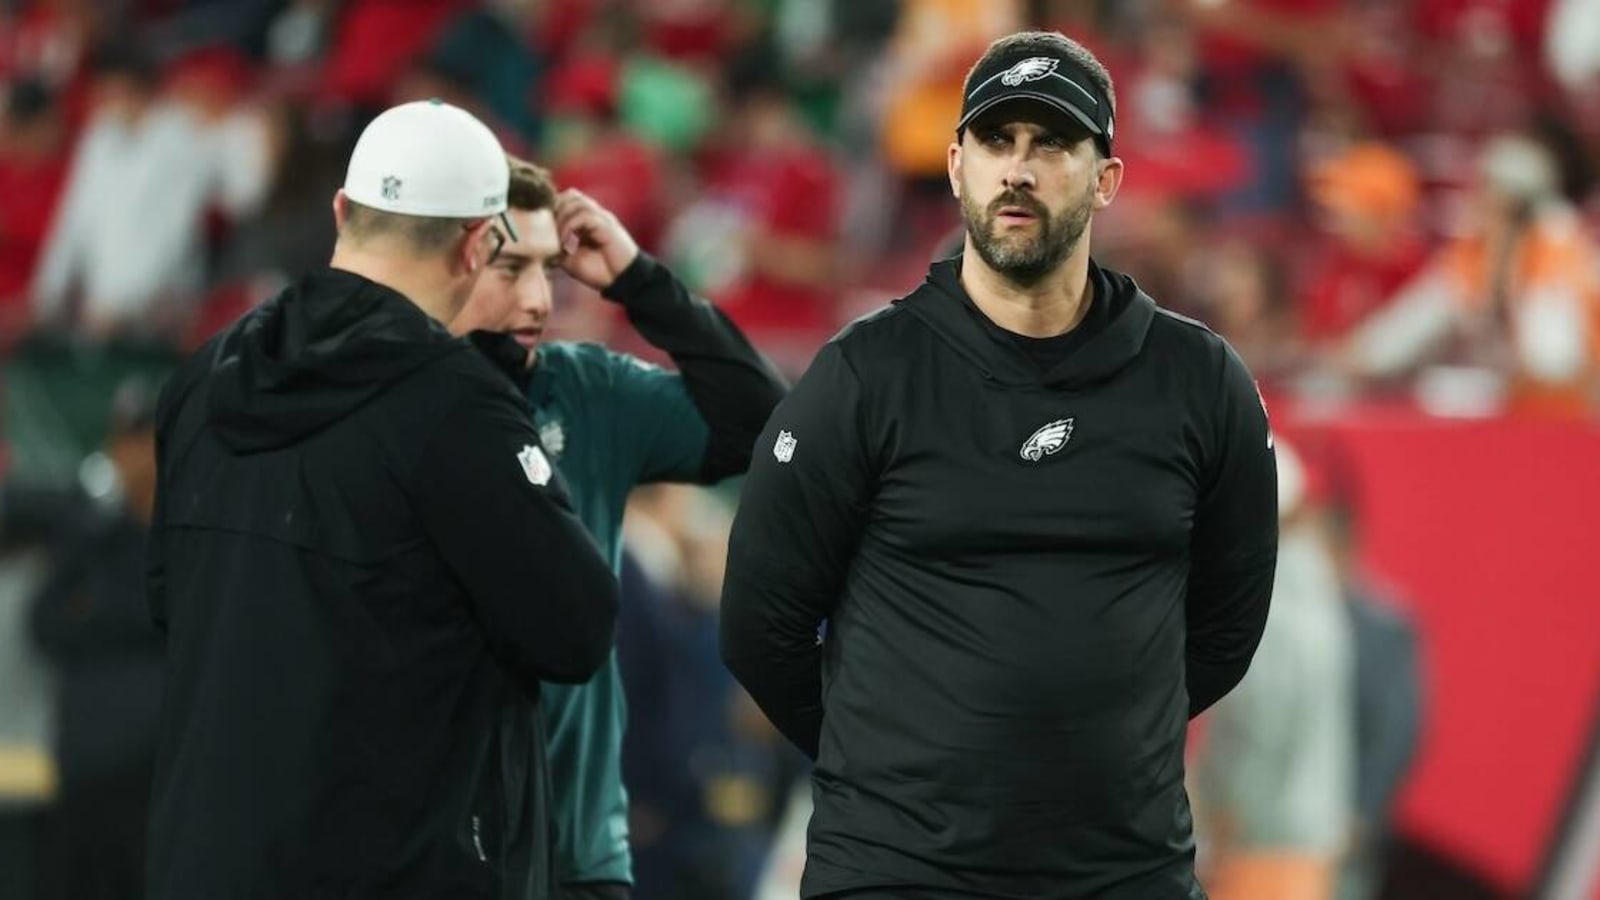 Why Nick Sirianni’s future with Eagles is in jeopardy after playoff loss